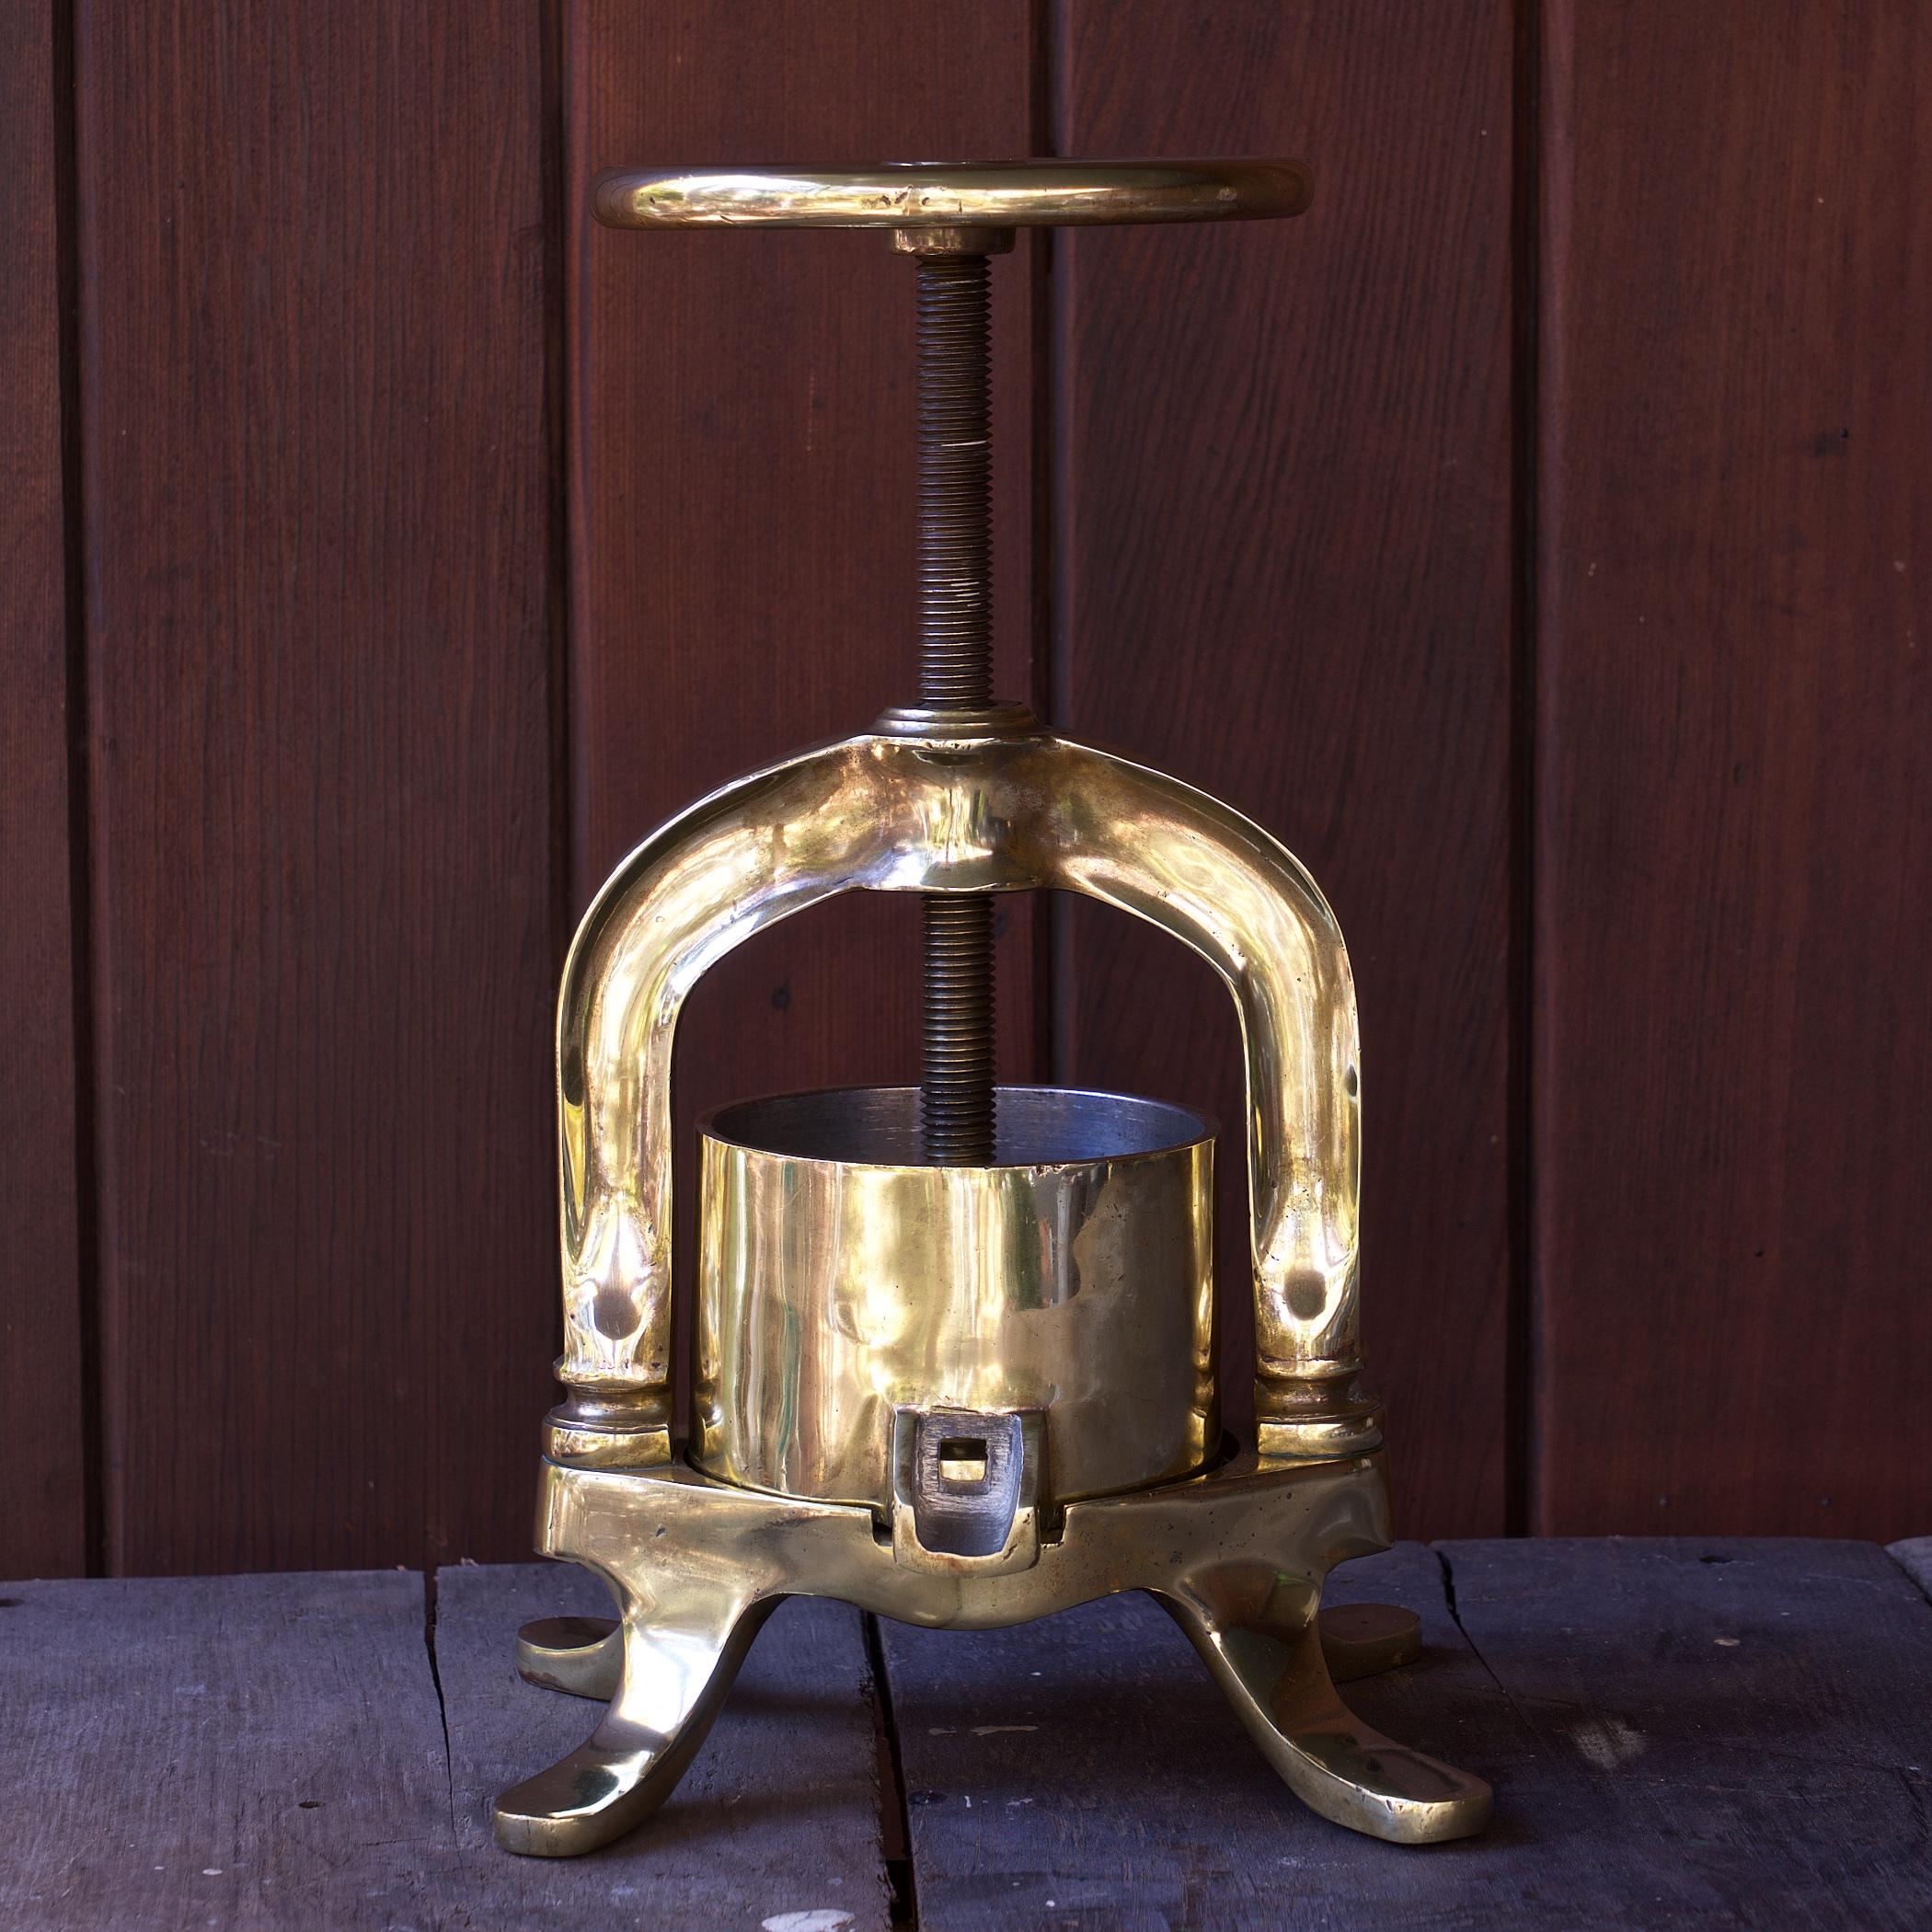 Patinated Polished Brass Duck Confit Press. Fully functional, runs smoothly.  There are no cracks or chips to the brass. This item came from very old Washington DC French Cooking School Teachers Estate. 

Wheel diameter is 5 inches.  Capacity is 3